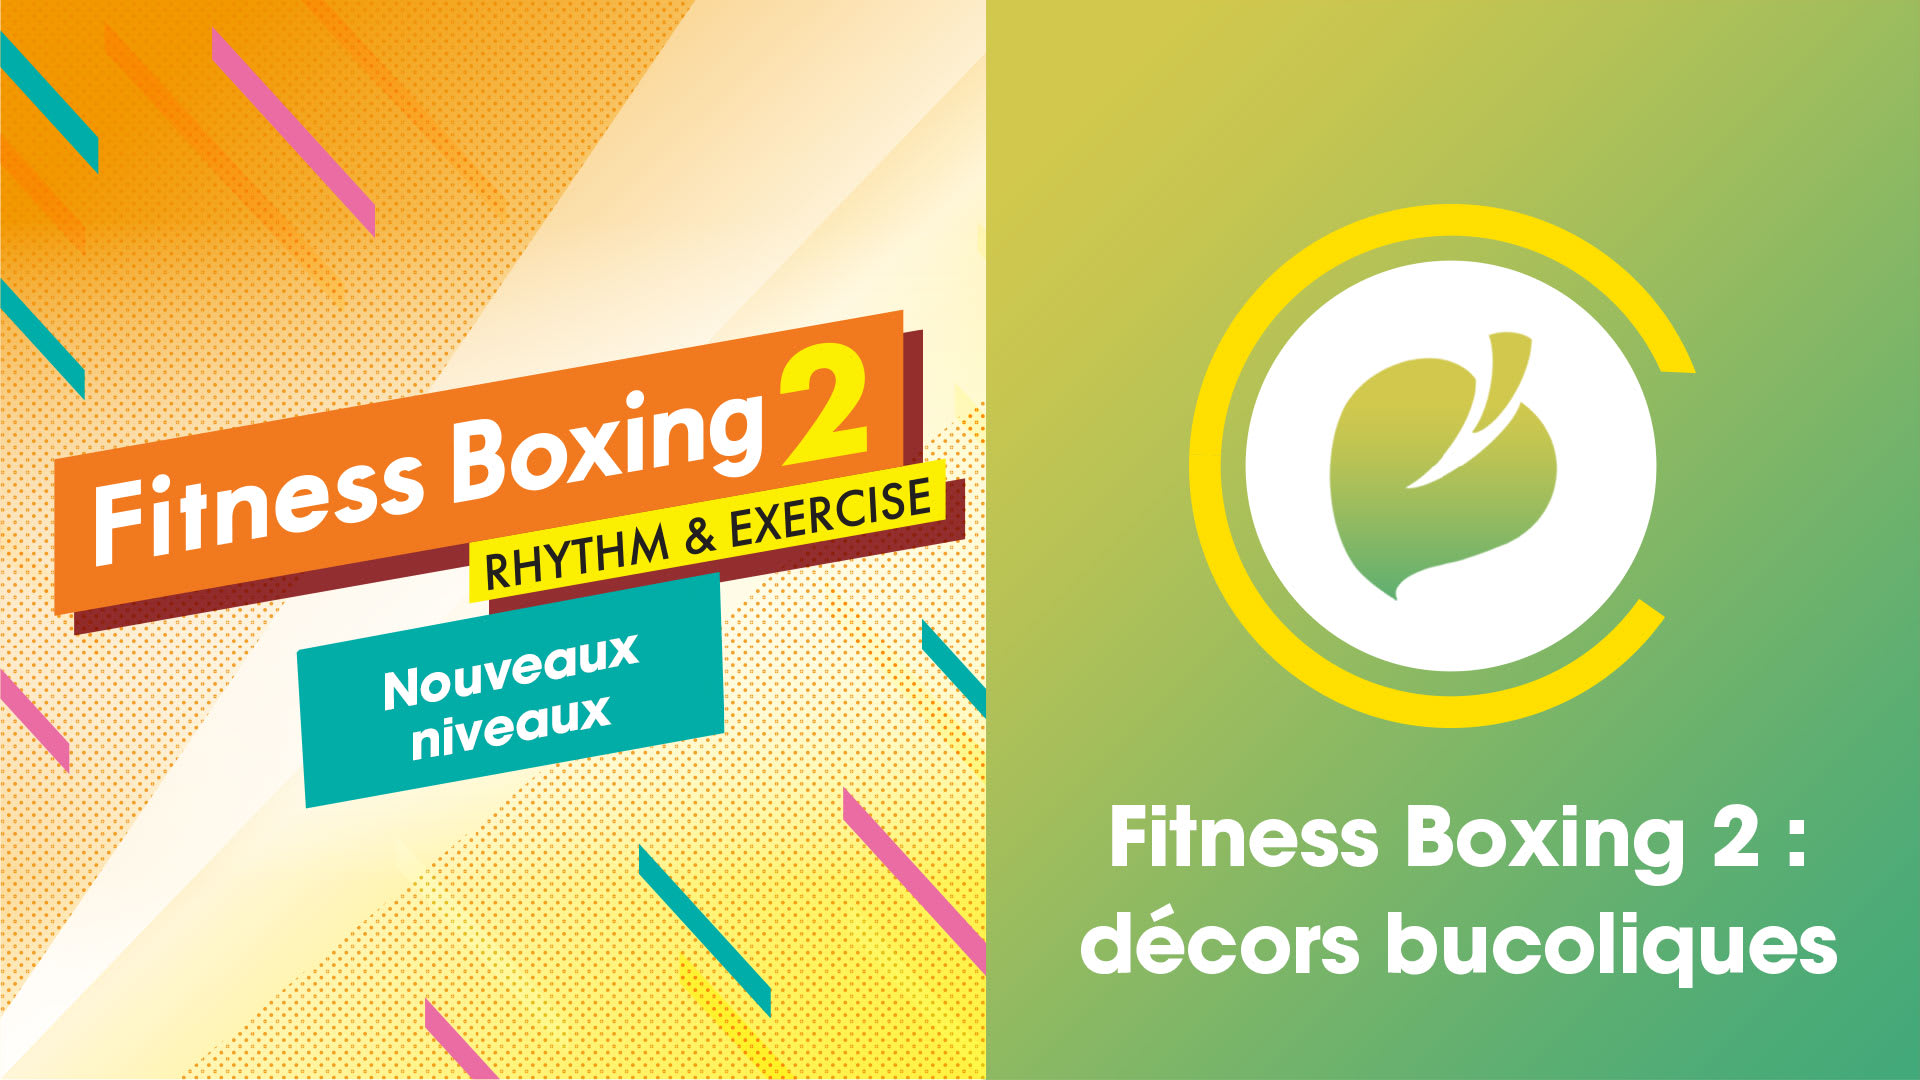 Fitness Boxing 2: Nature Stages